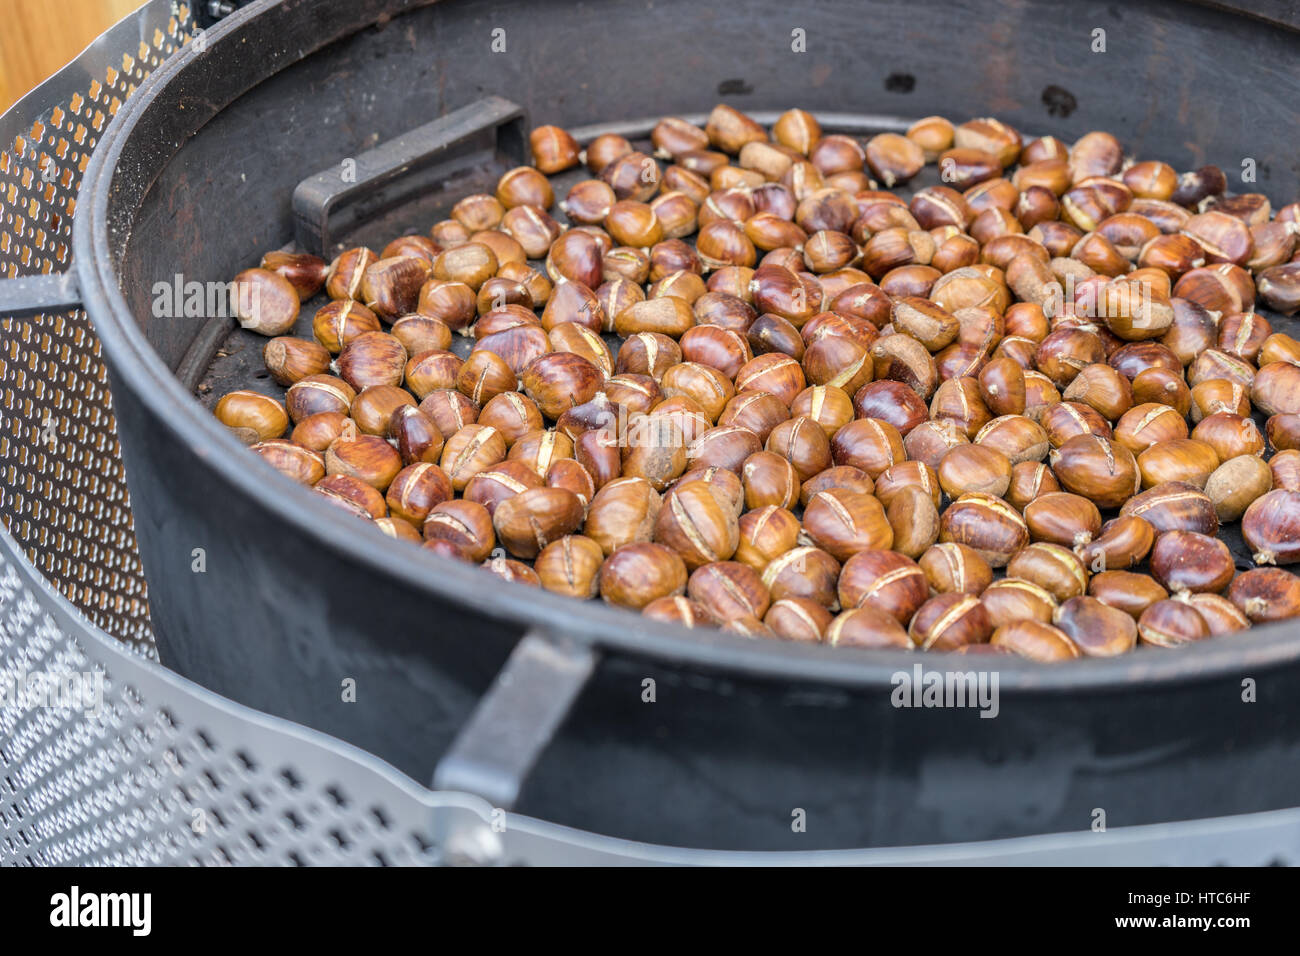 Chestnuts are roasted in a pan Stock Photo